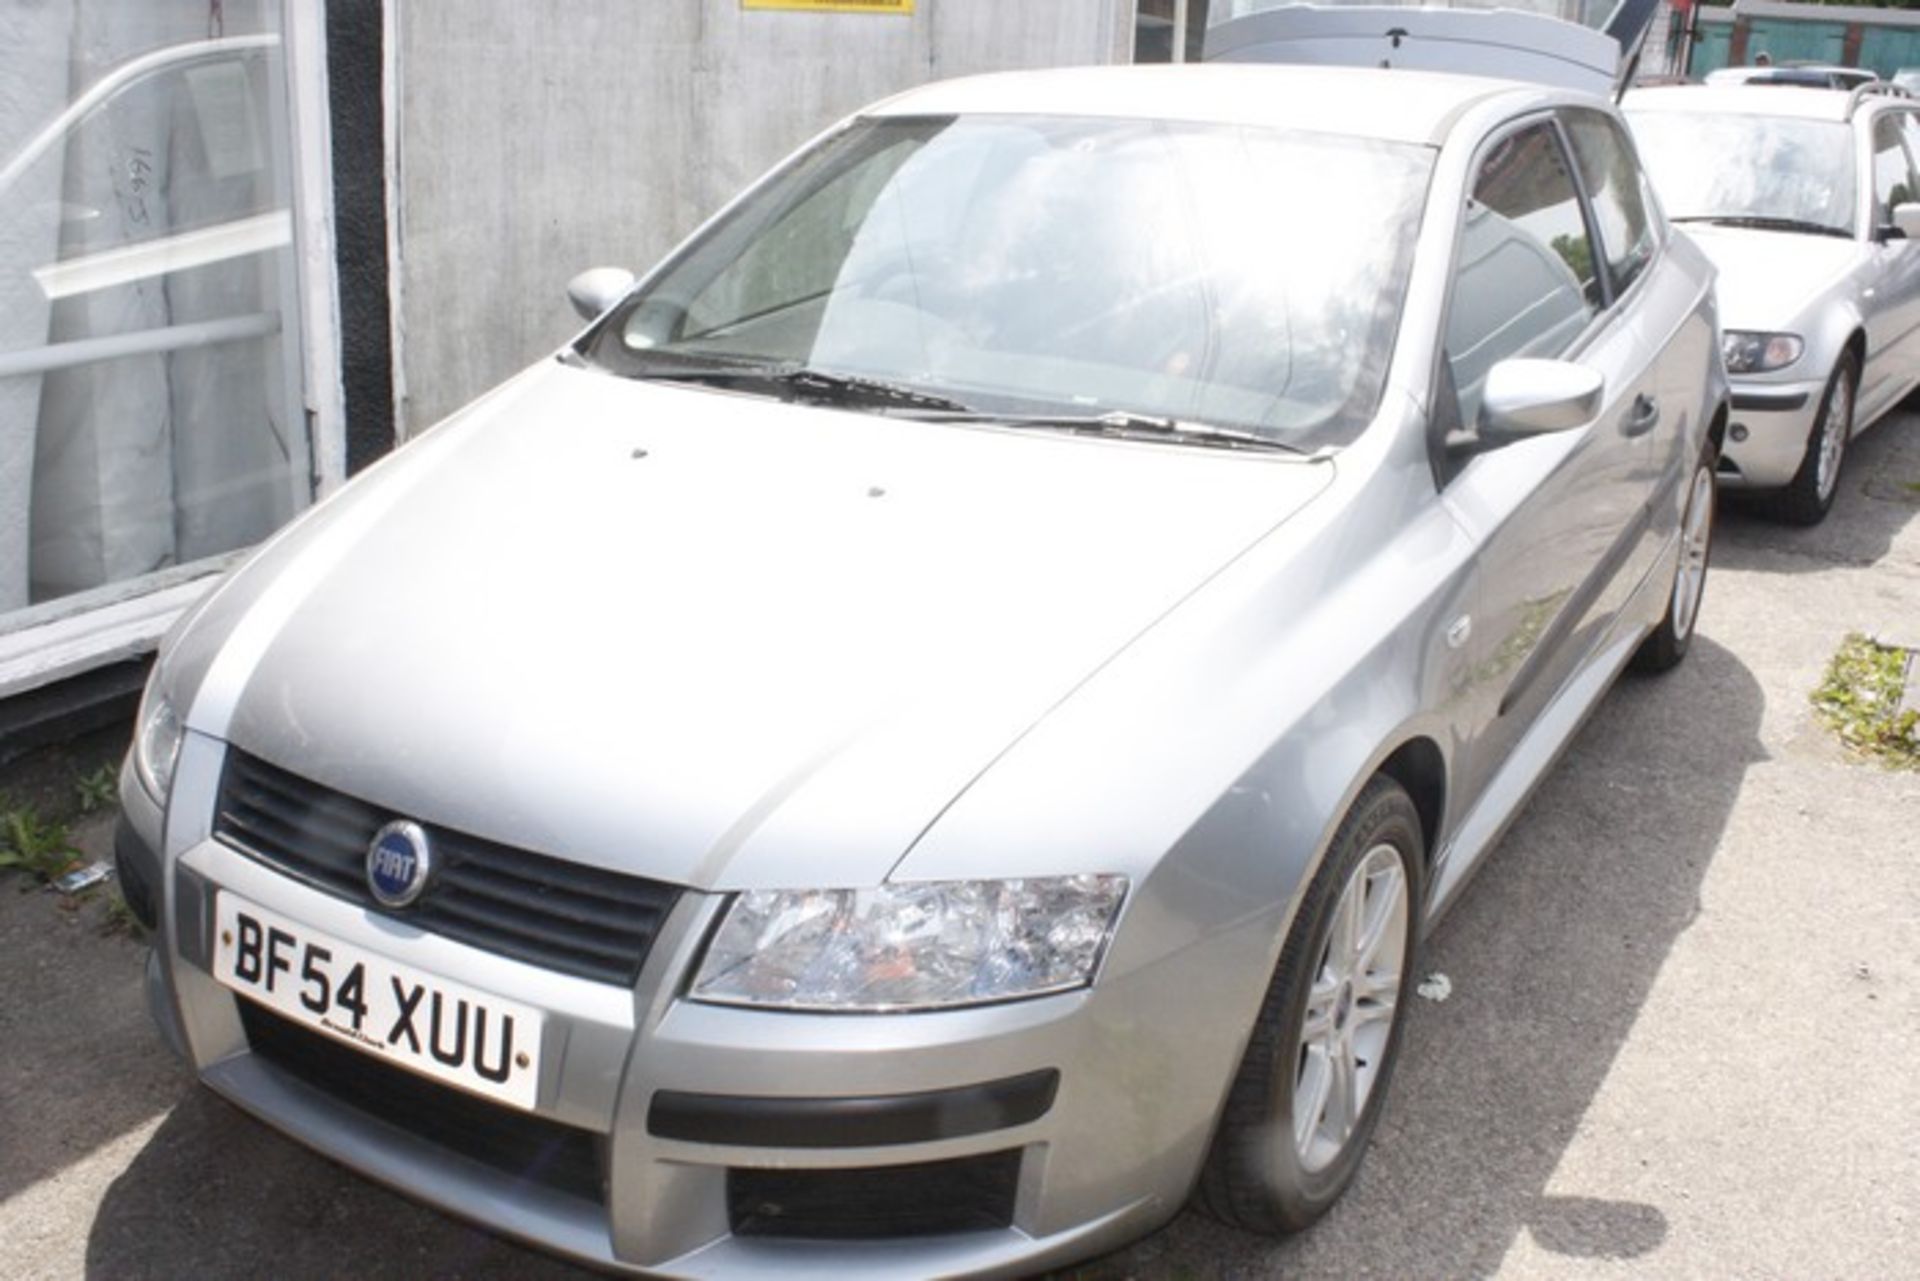 FIAT STILO ACTIVE SPORT, BF54 XUU, 67,320 MILES, ONE PREVIOUS OWNER, CENTRAL LOCKING, ELECTRIC